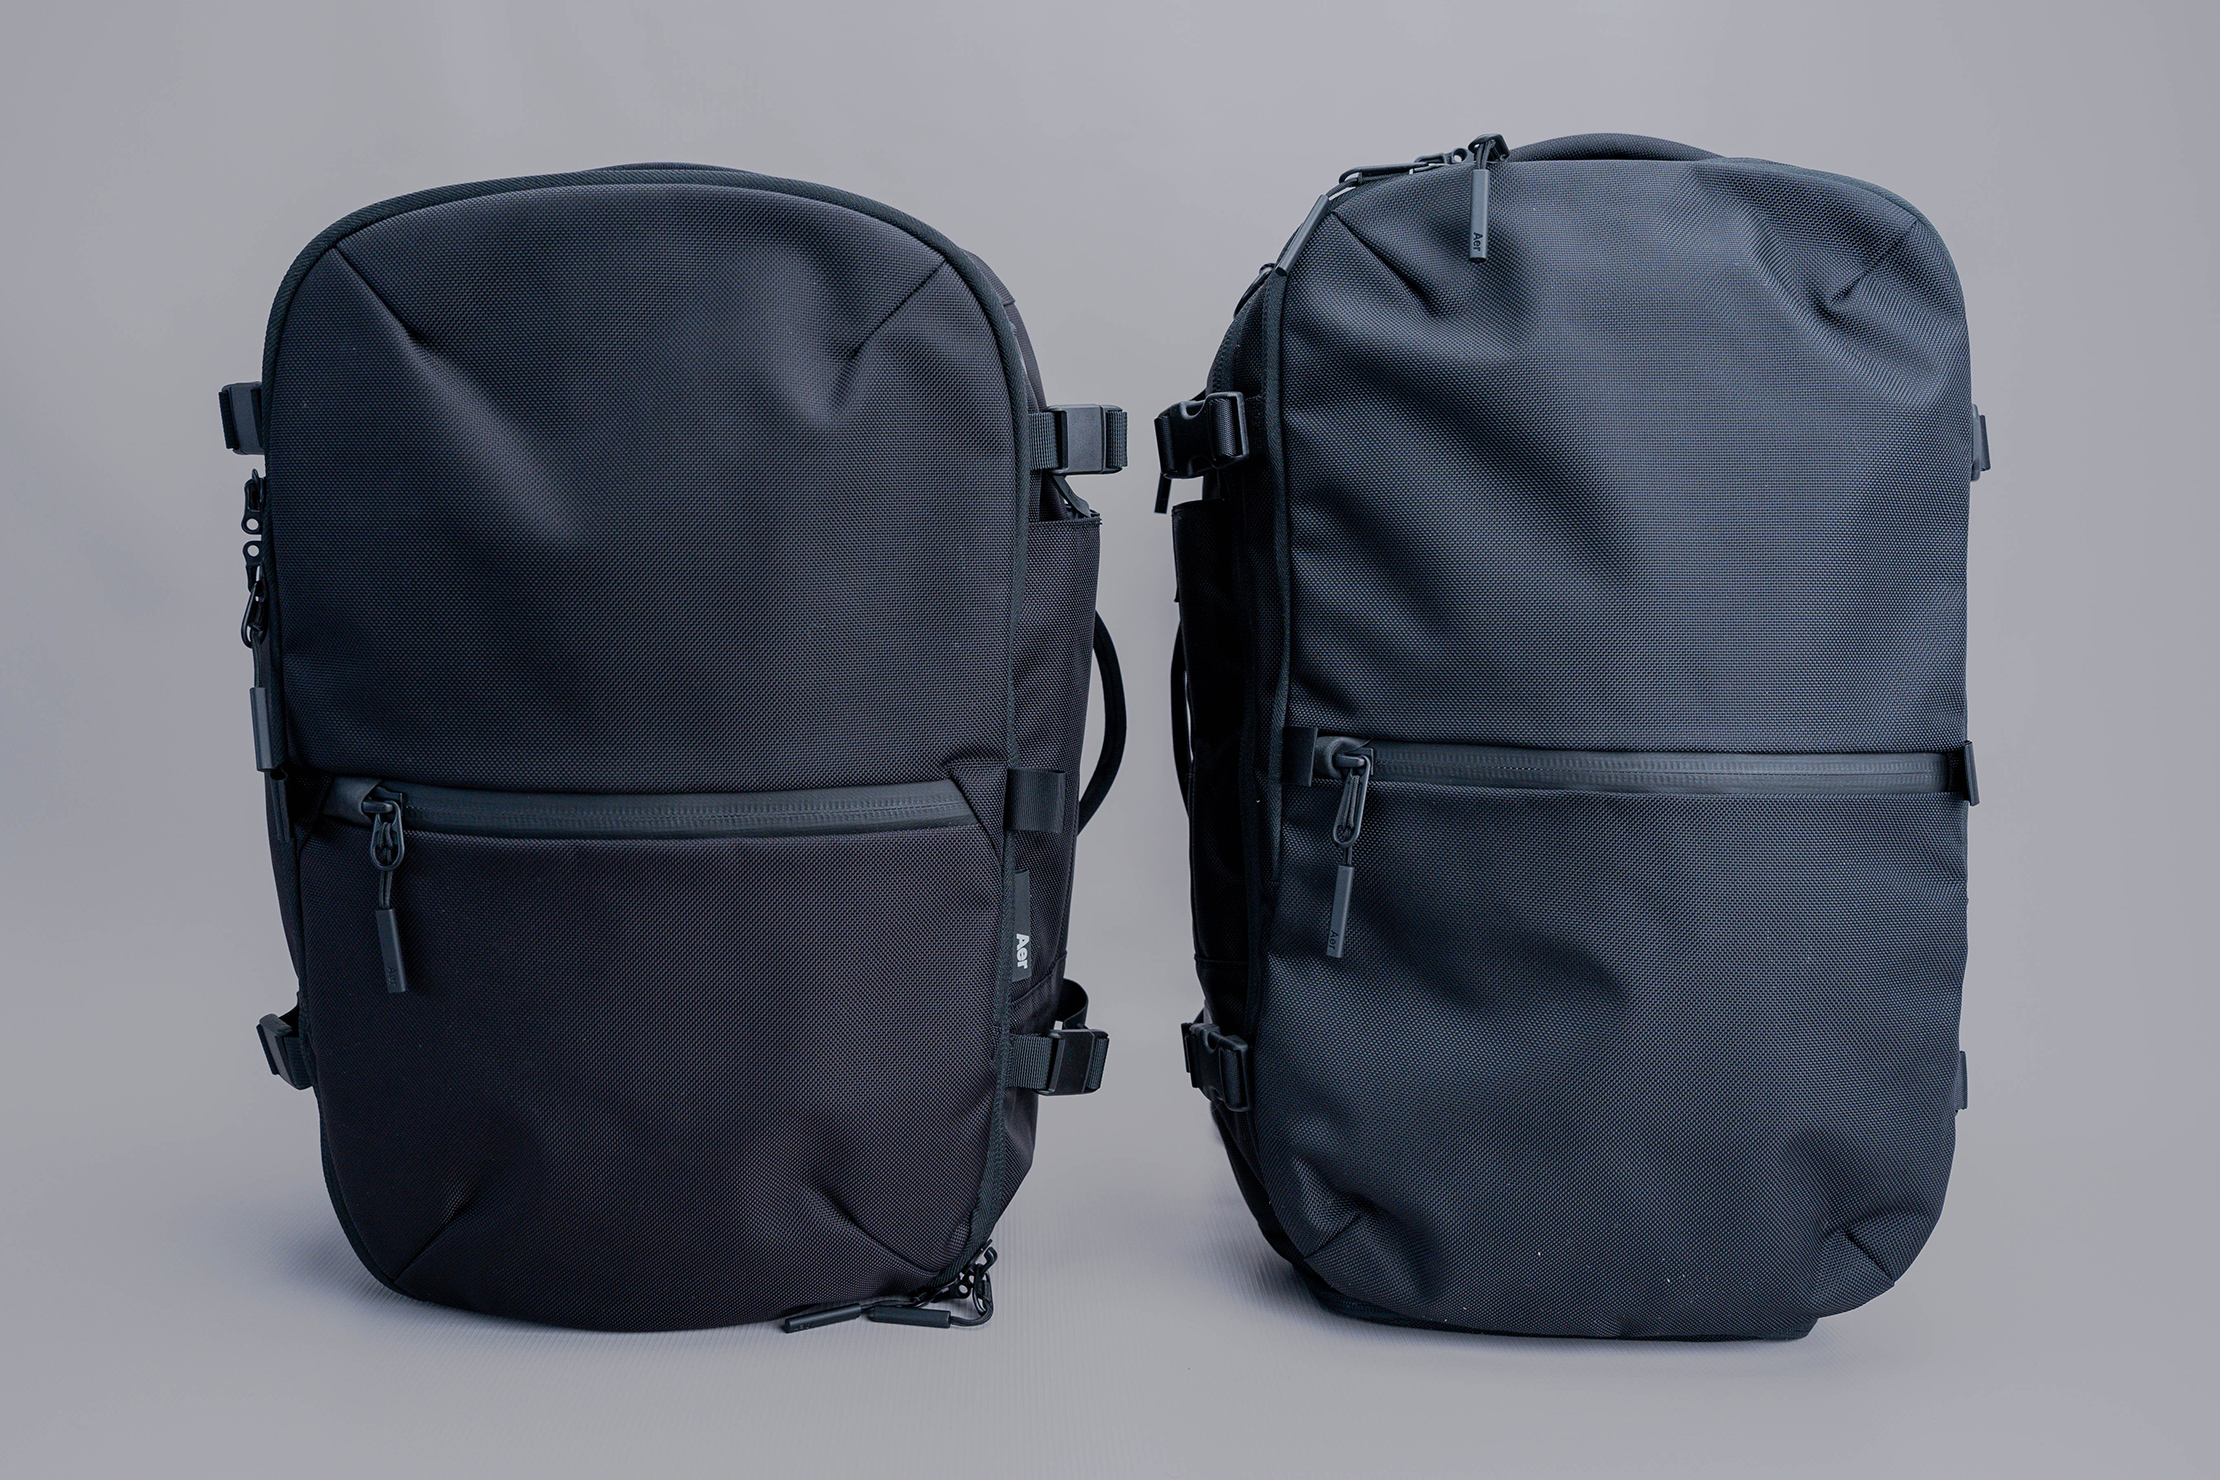 Aer Travel Pack 3 and Travel Pack 2 B